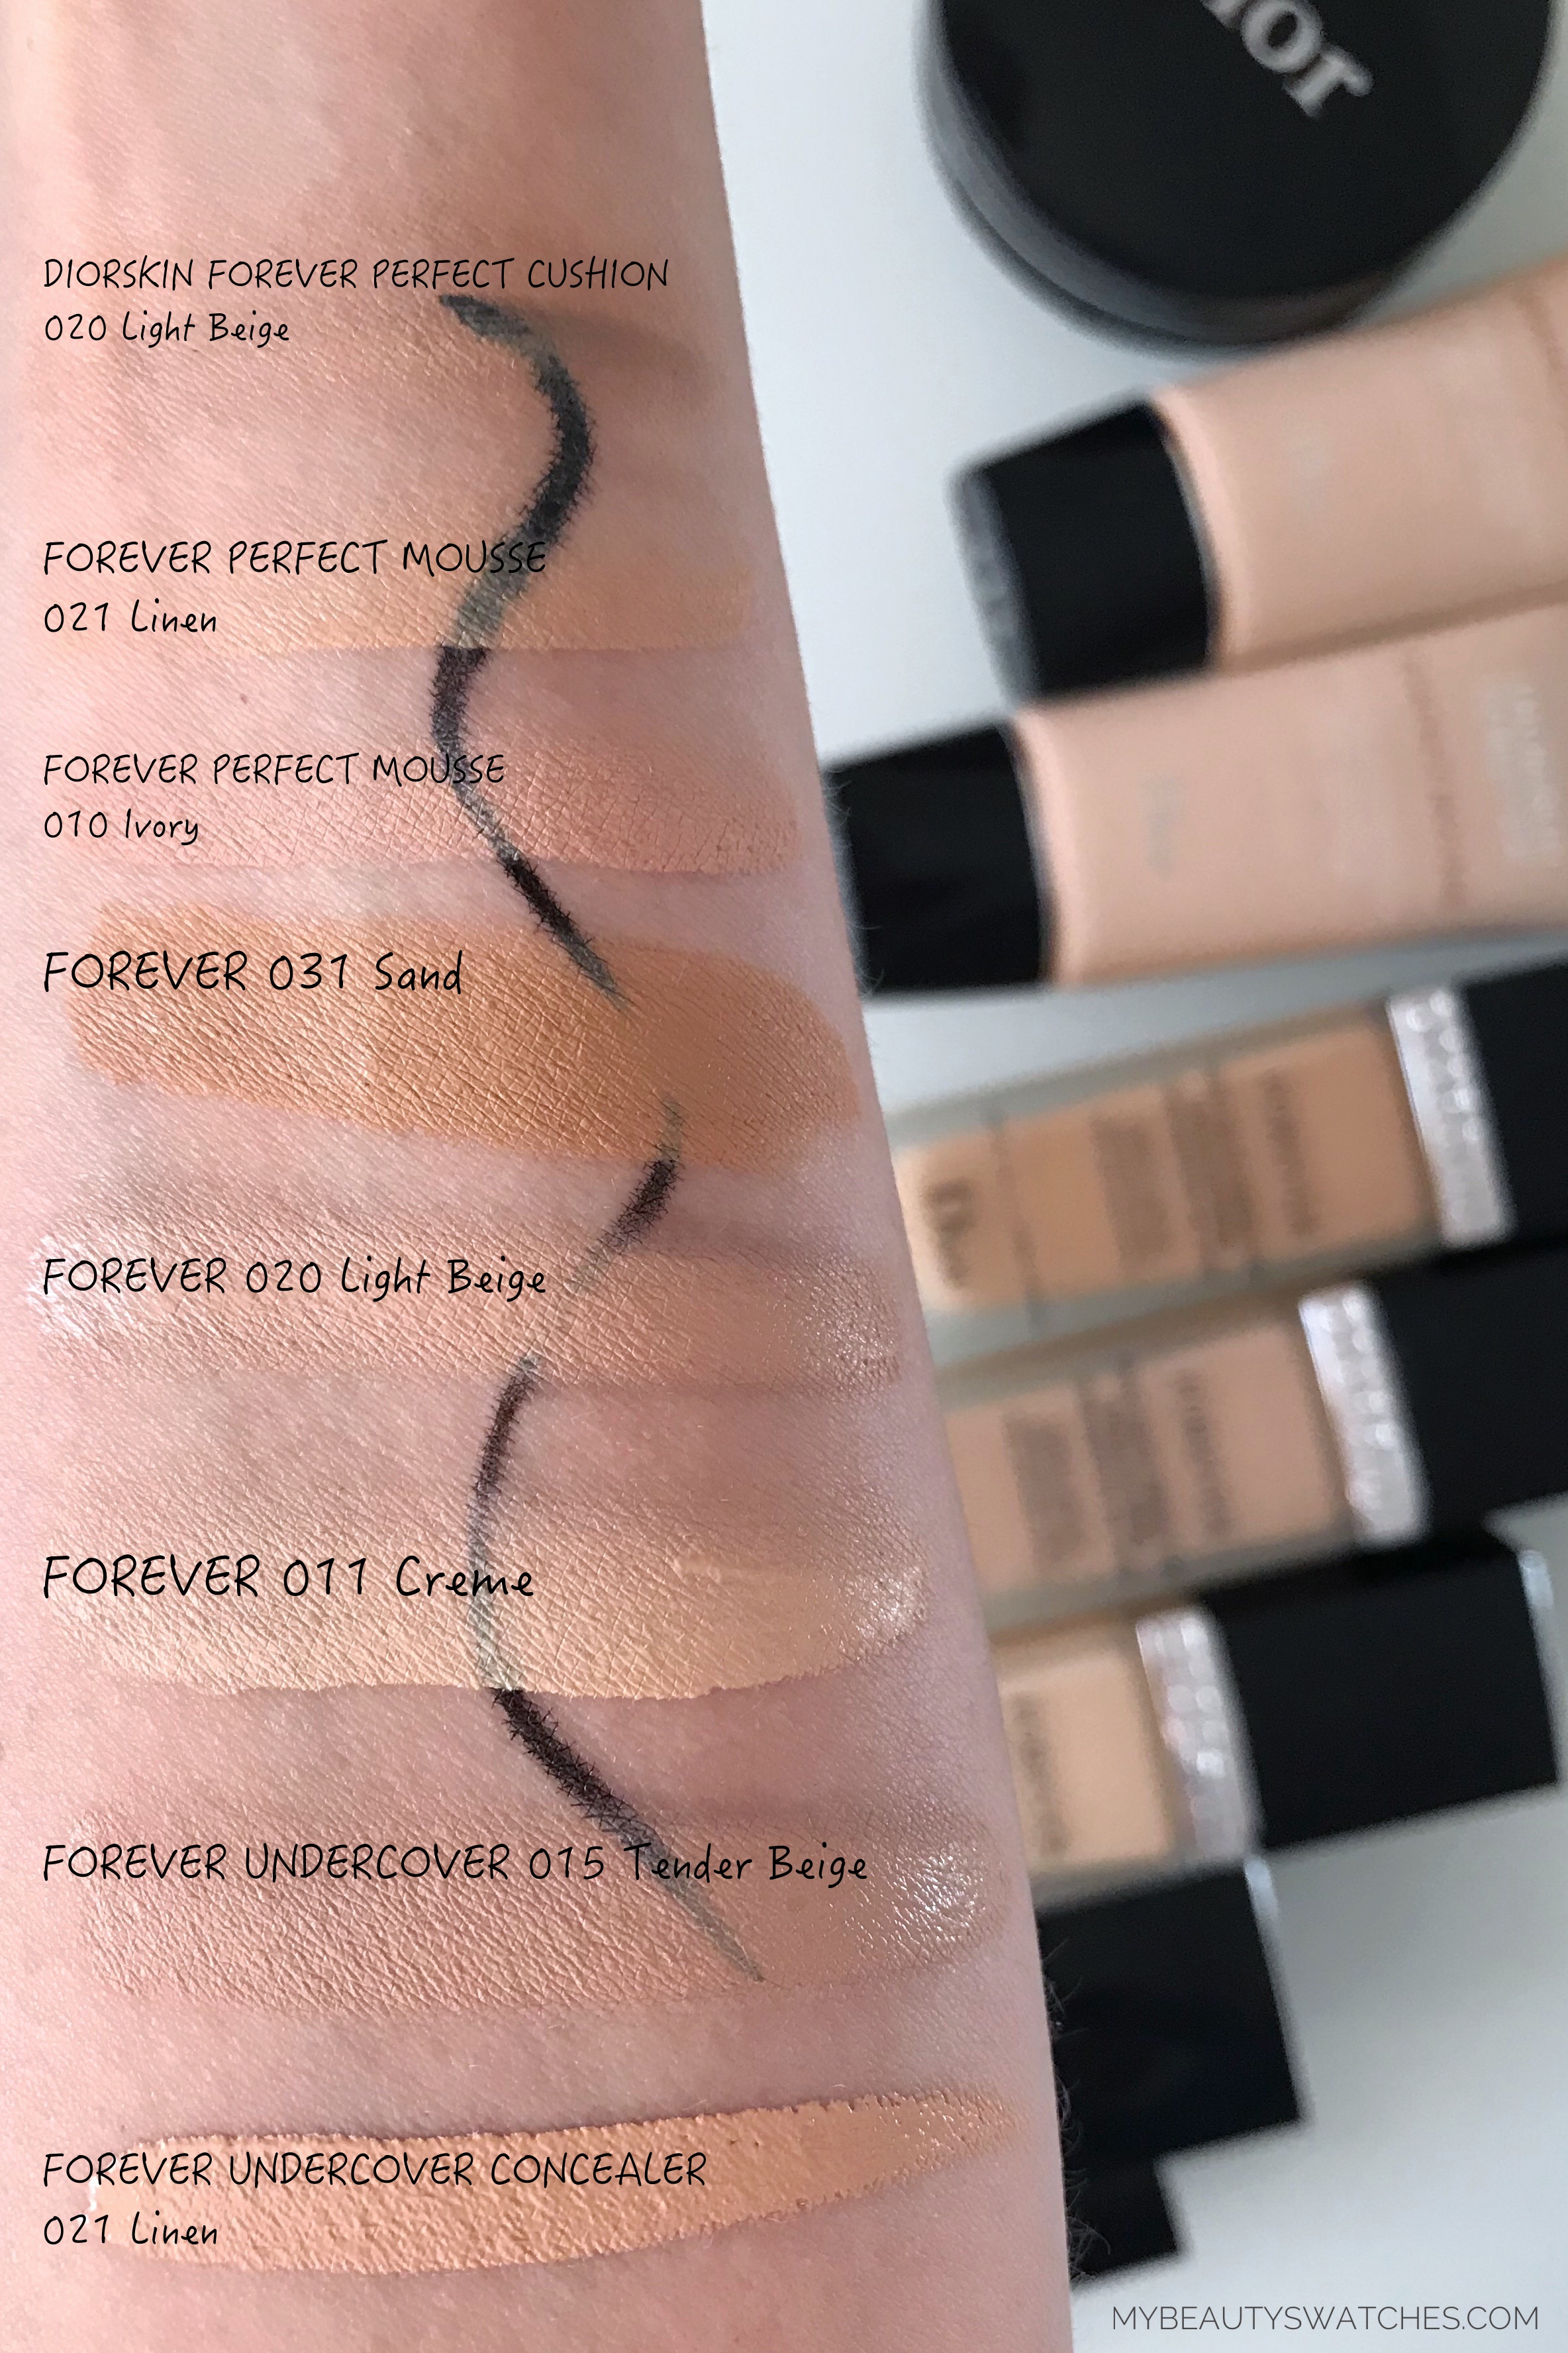 diorskin forever perfect mousse foundation